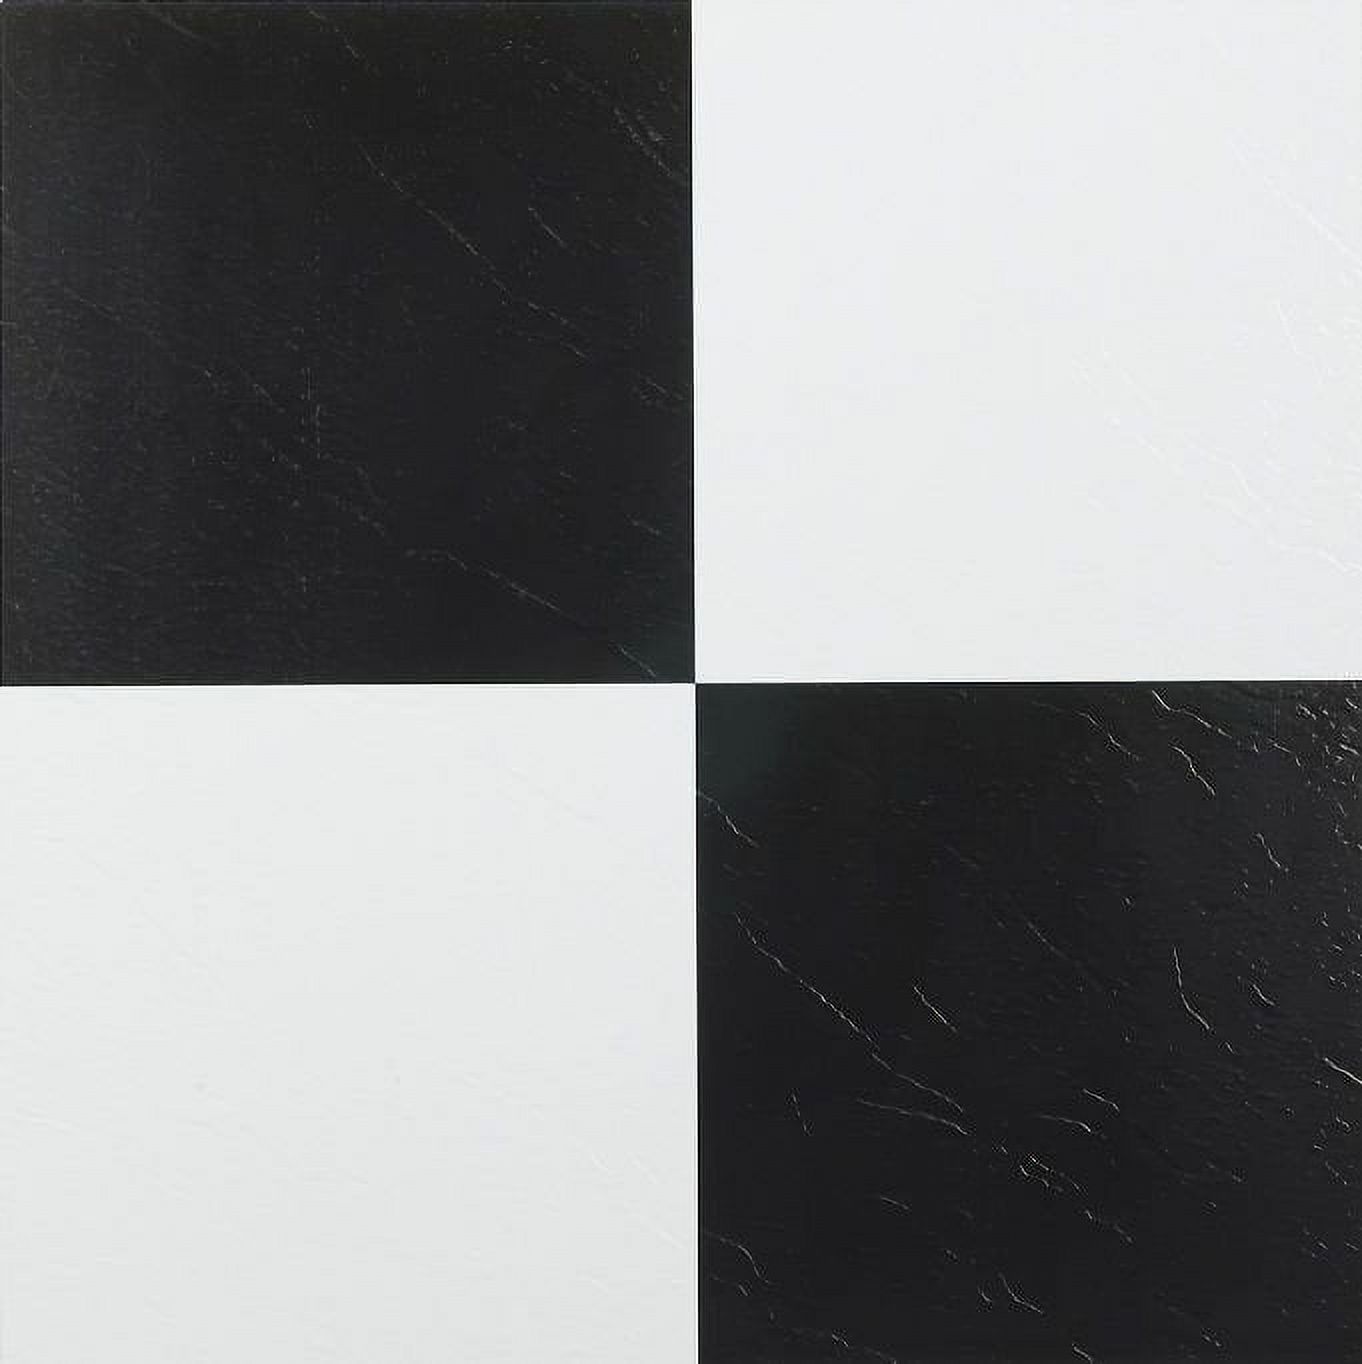 Black & White Checkered Vinyl Floor Tiles Adhesive Stick and Peel 12'' x 12'' 1-Pack (20 Pieces) - image 1 of 2